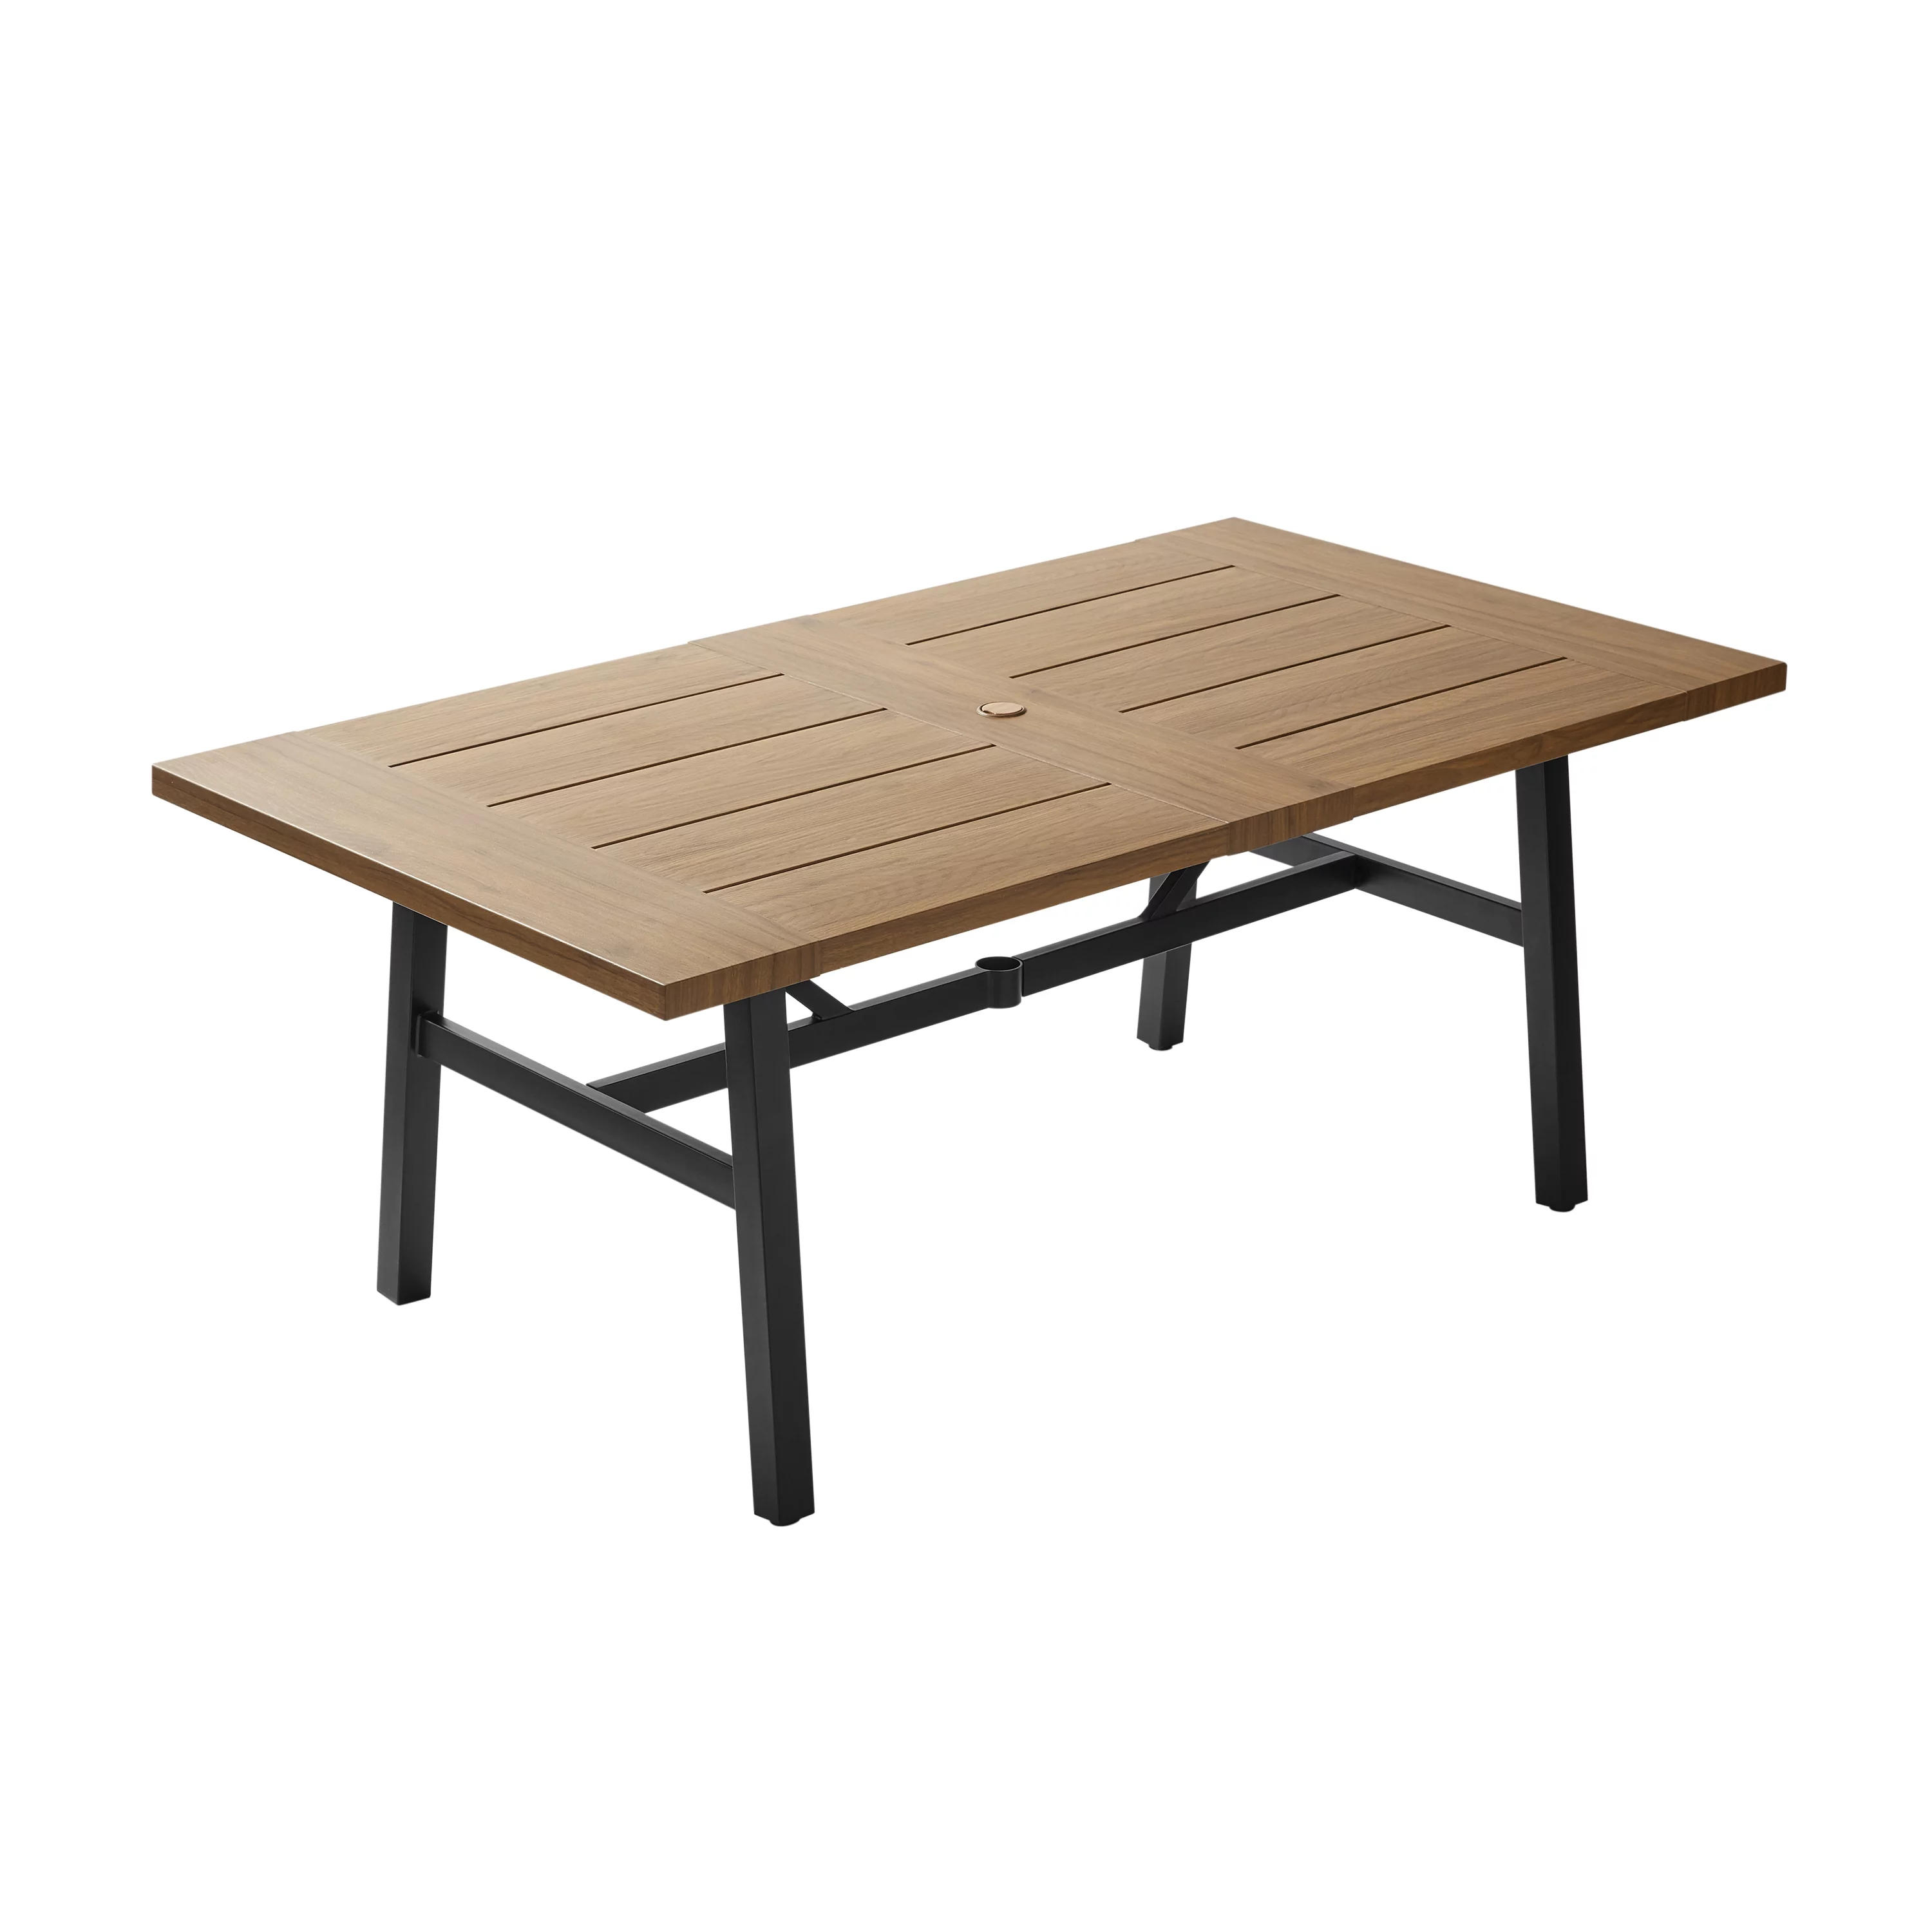 Better Homes & Gardens Kennedy Pointe 70" Steel Outdoor Dining Table, Brown/Black